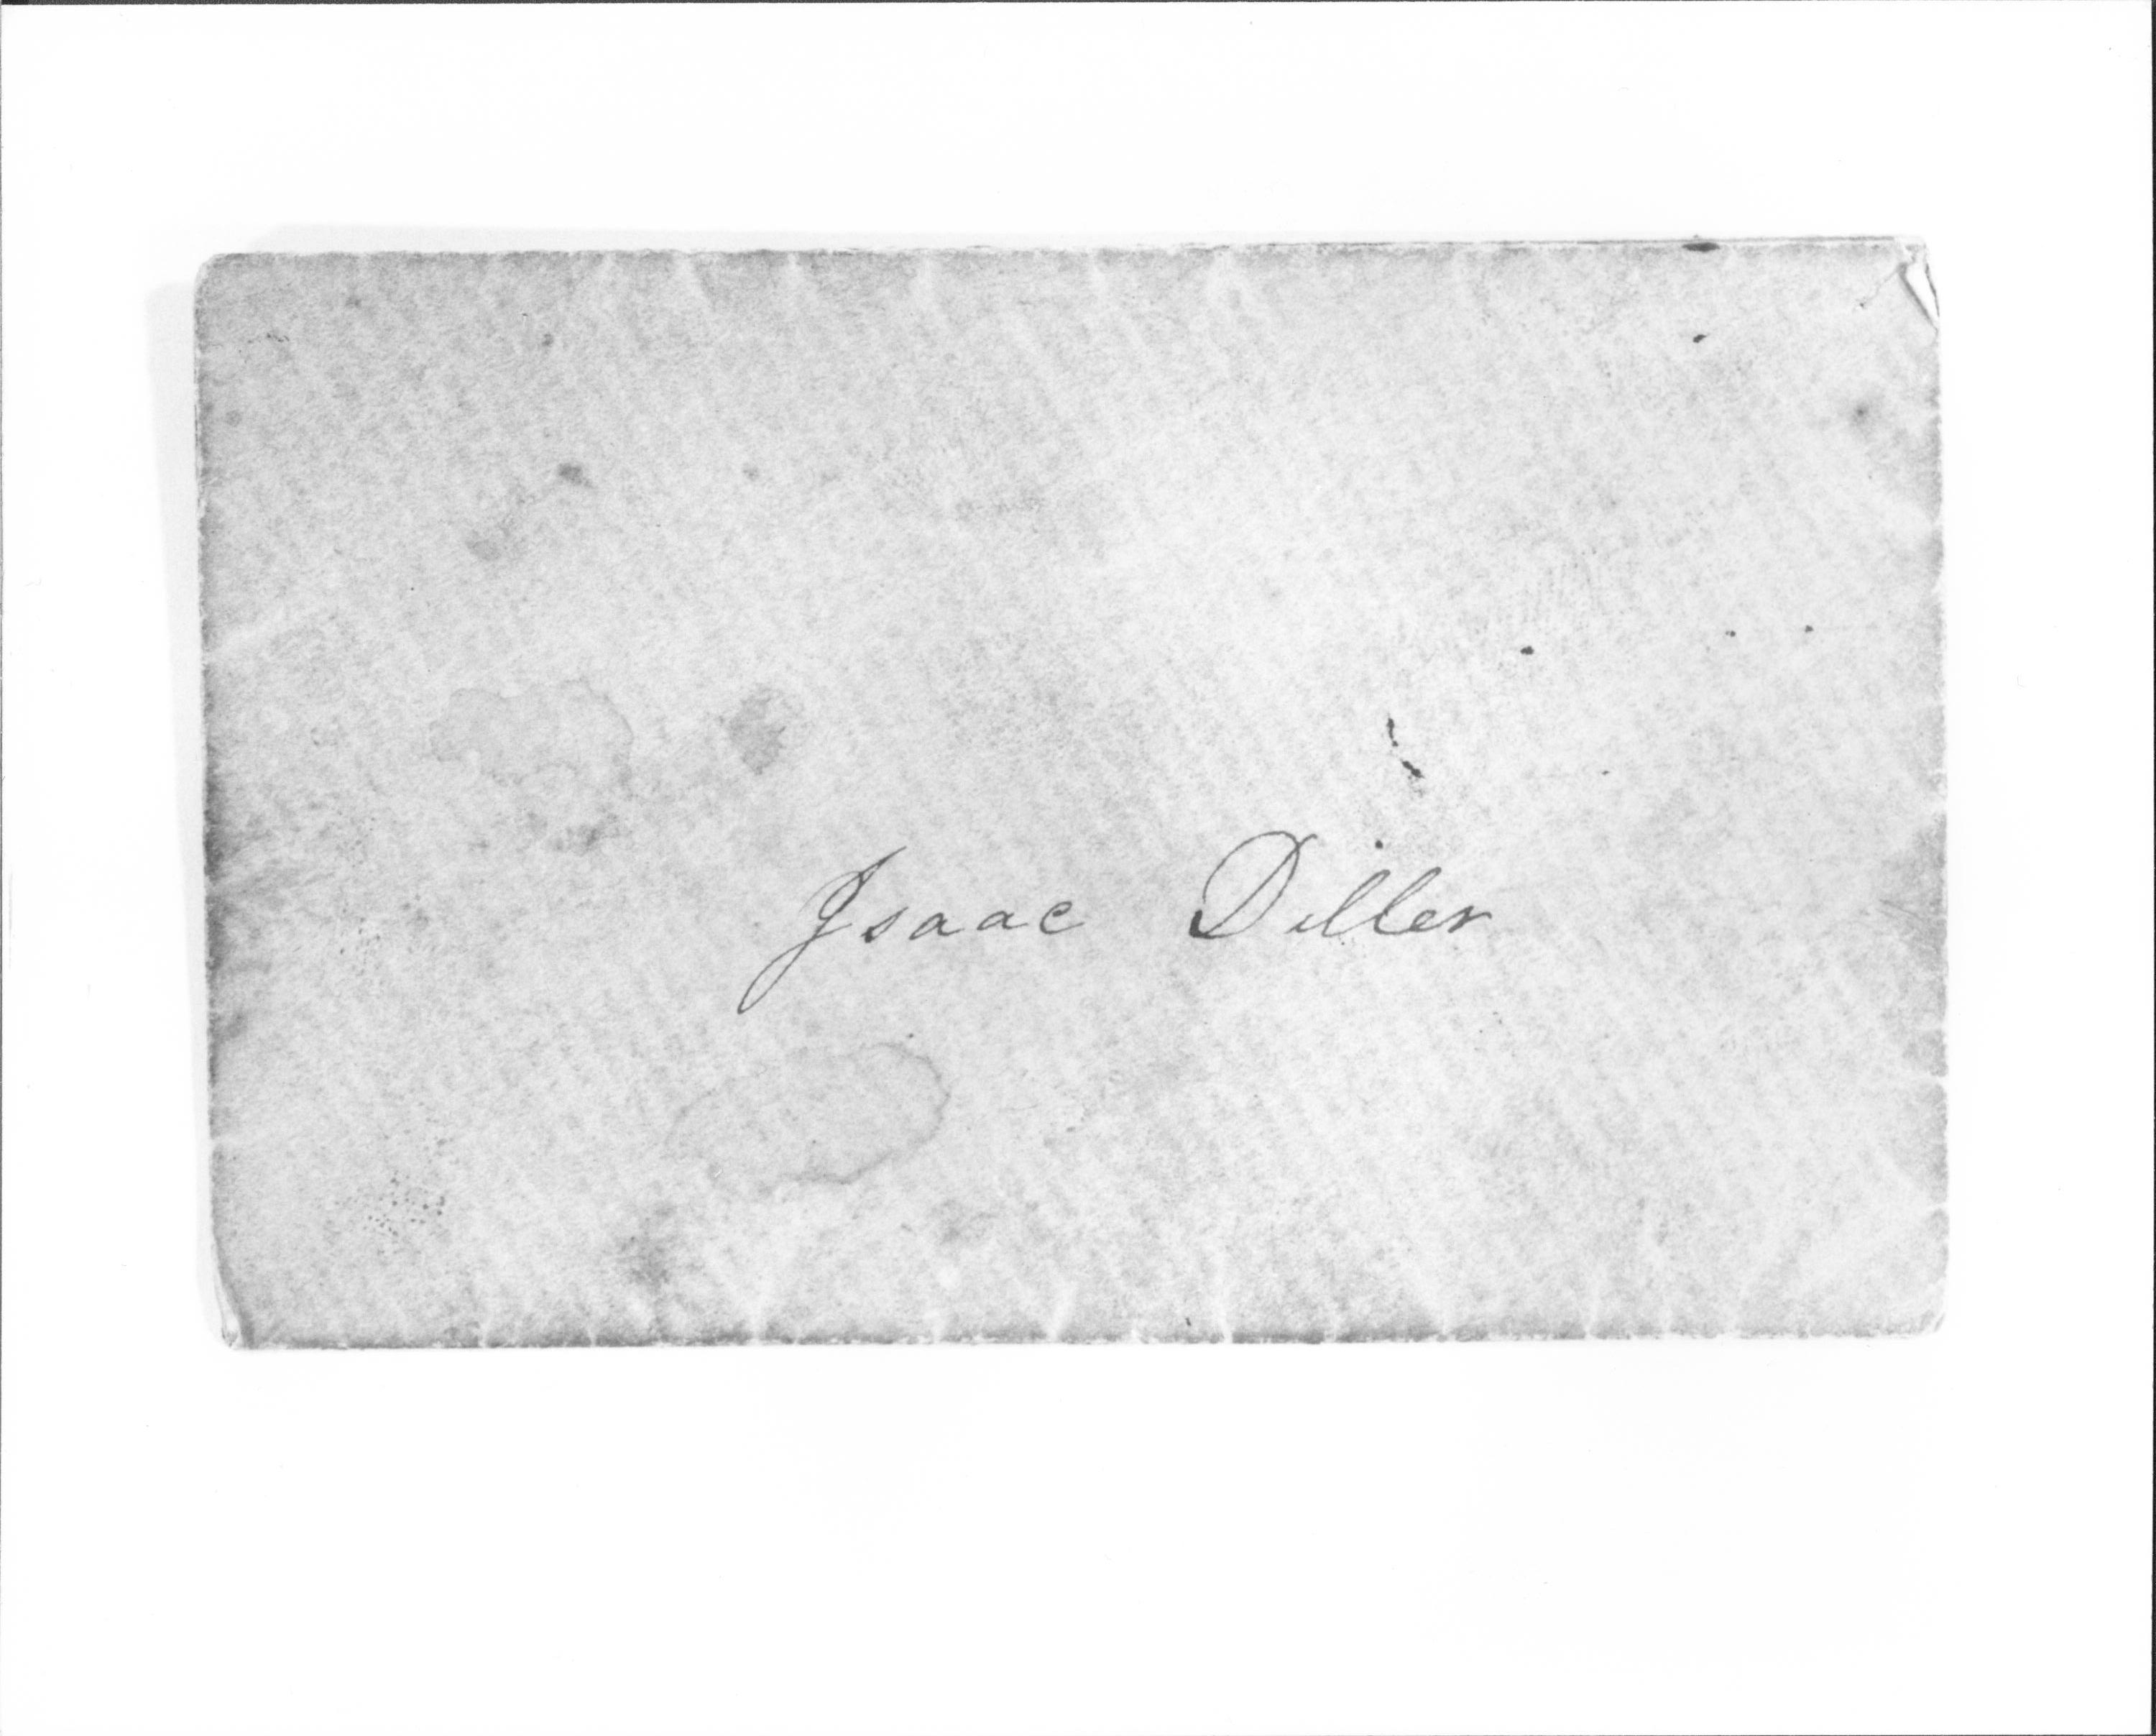 Willie Lincoln invitation to Isaac Diller(envelope) for Dean House exhibit. Lincoln Home NHS- Dean House exhibit, Original in collection of William Hughes Diller Dean House, exhibit, envelope